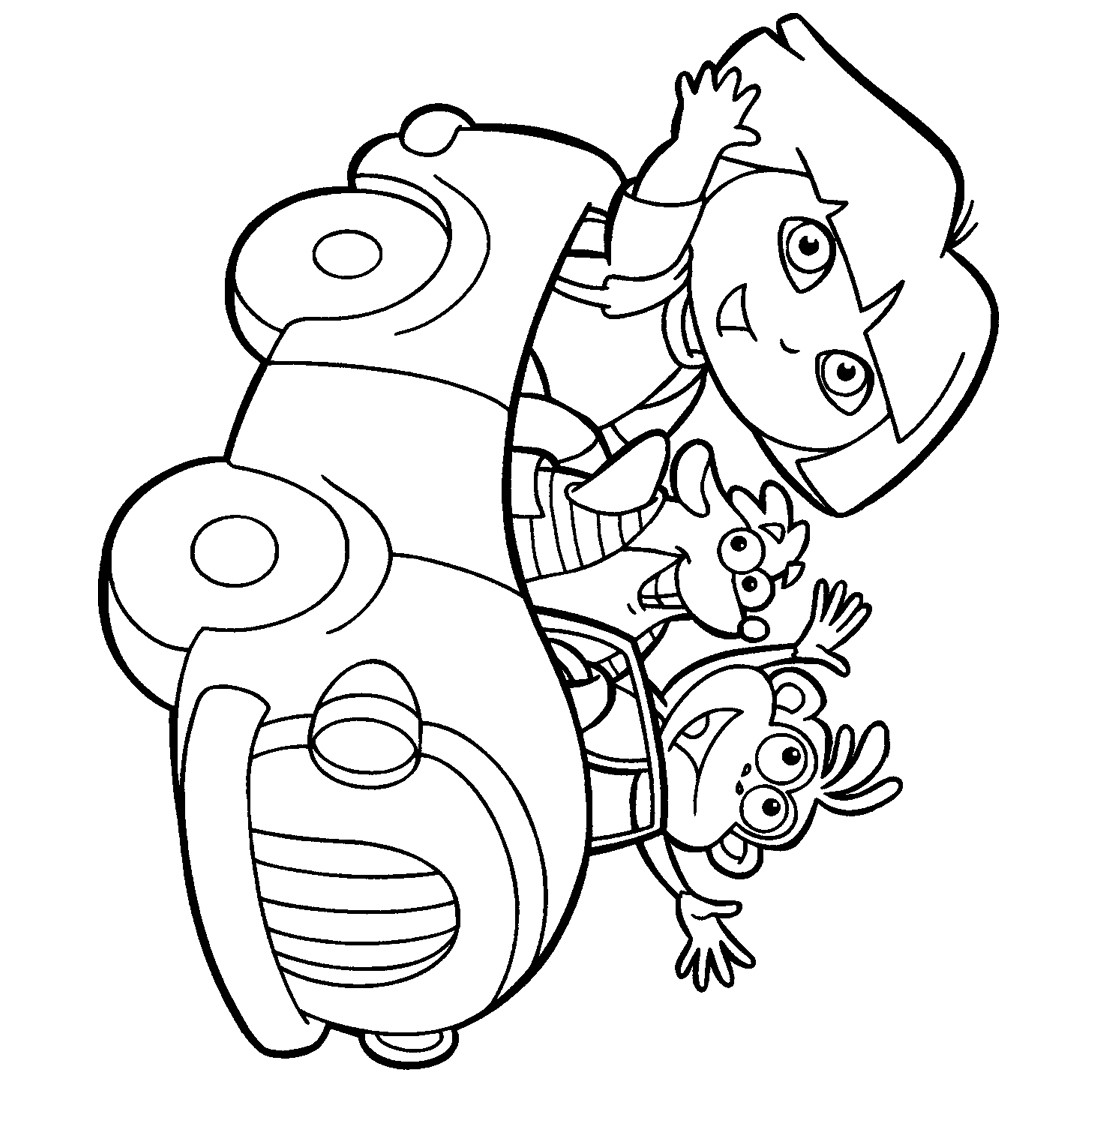 Coloring-Pages-Kids
 Printable coloring pages for kids